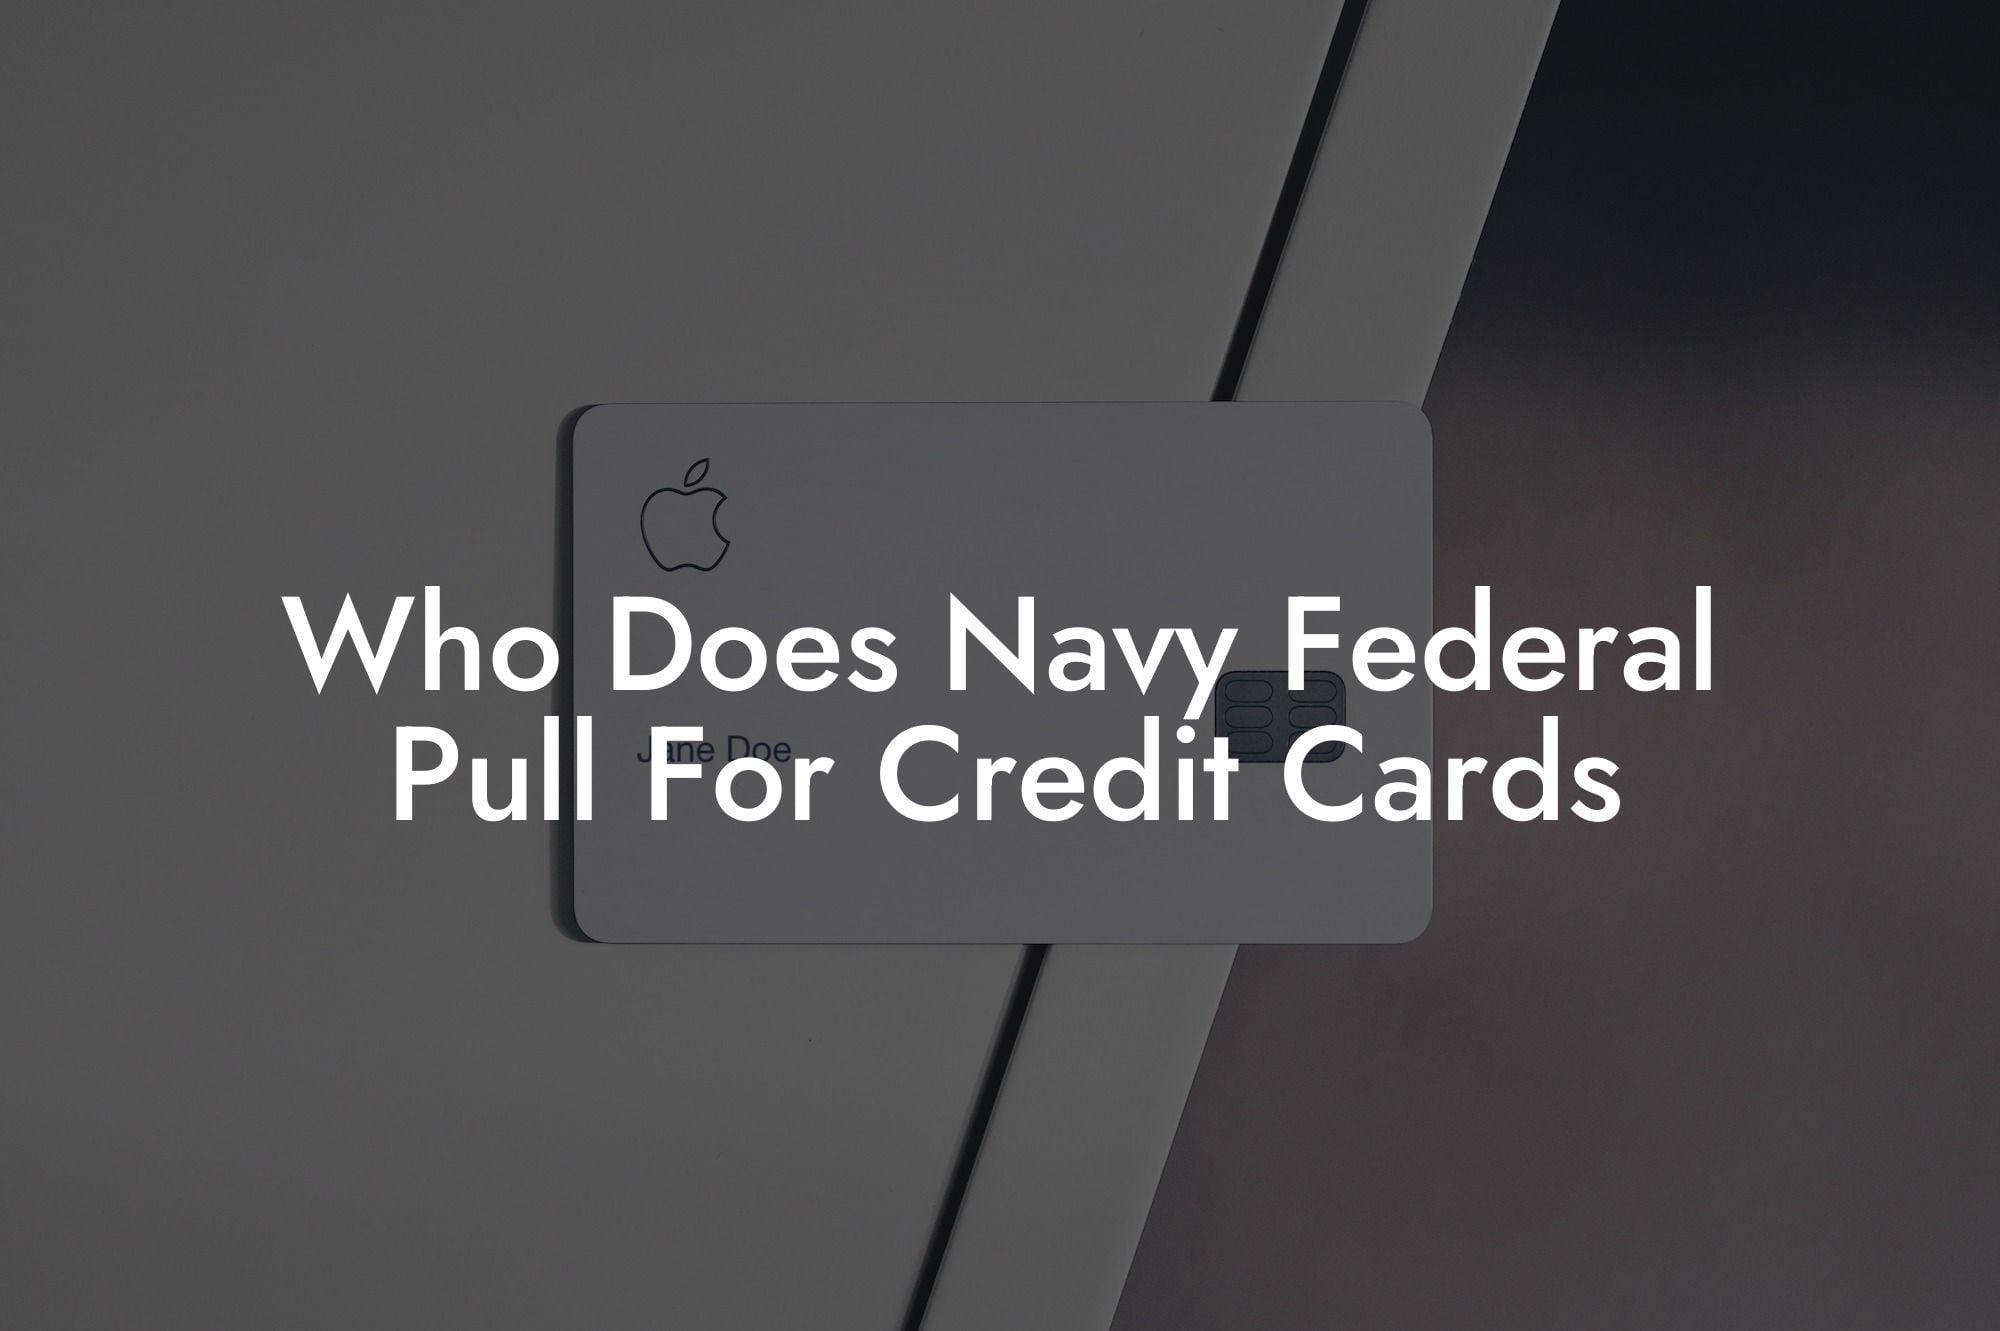 Who Does Navy Federal Pull For Credit Cards